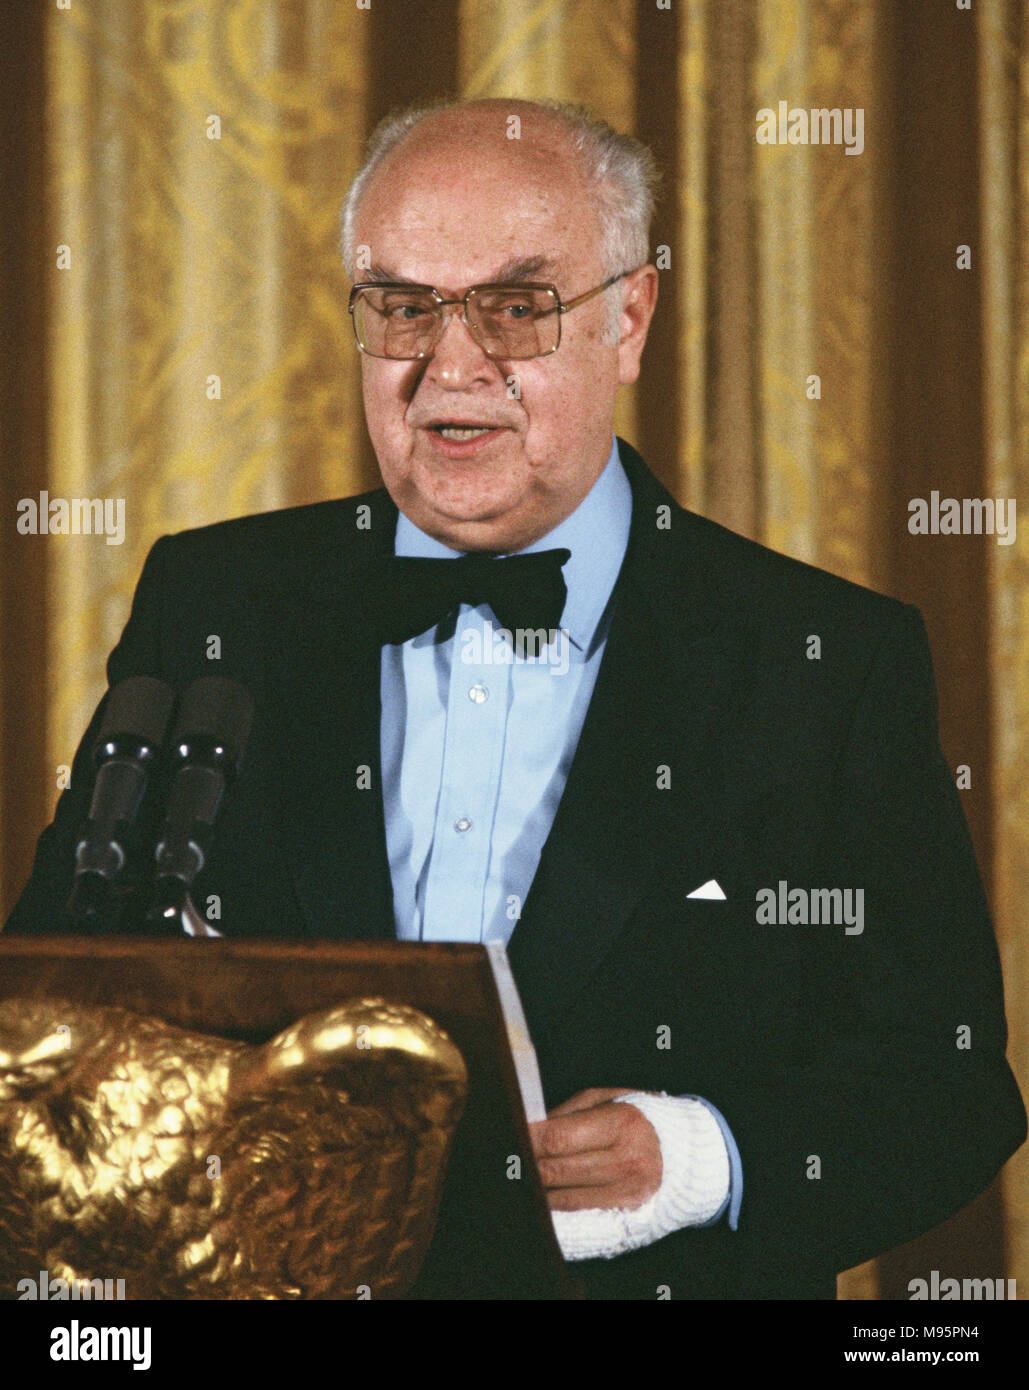 Ambassador Anatoly Dobrynin, Dean of the diplomatic corps,delivers a toast at a State Dinner for the Diplomatic Corps in the State Dining Room of the White House on February 19, 1982   Photograph by Dennis Brack Stock Photo